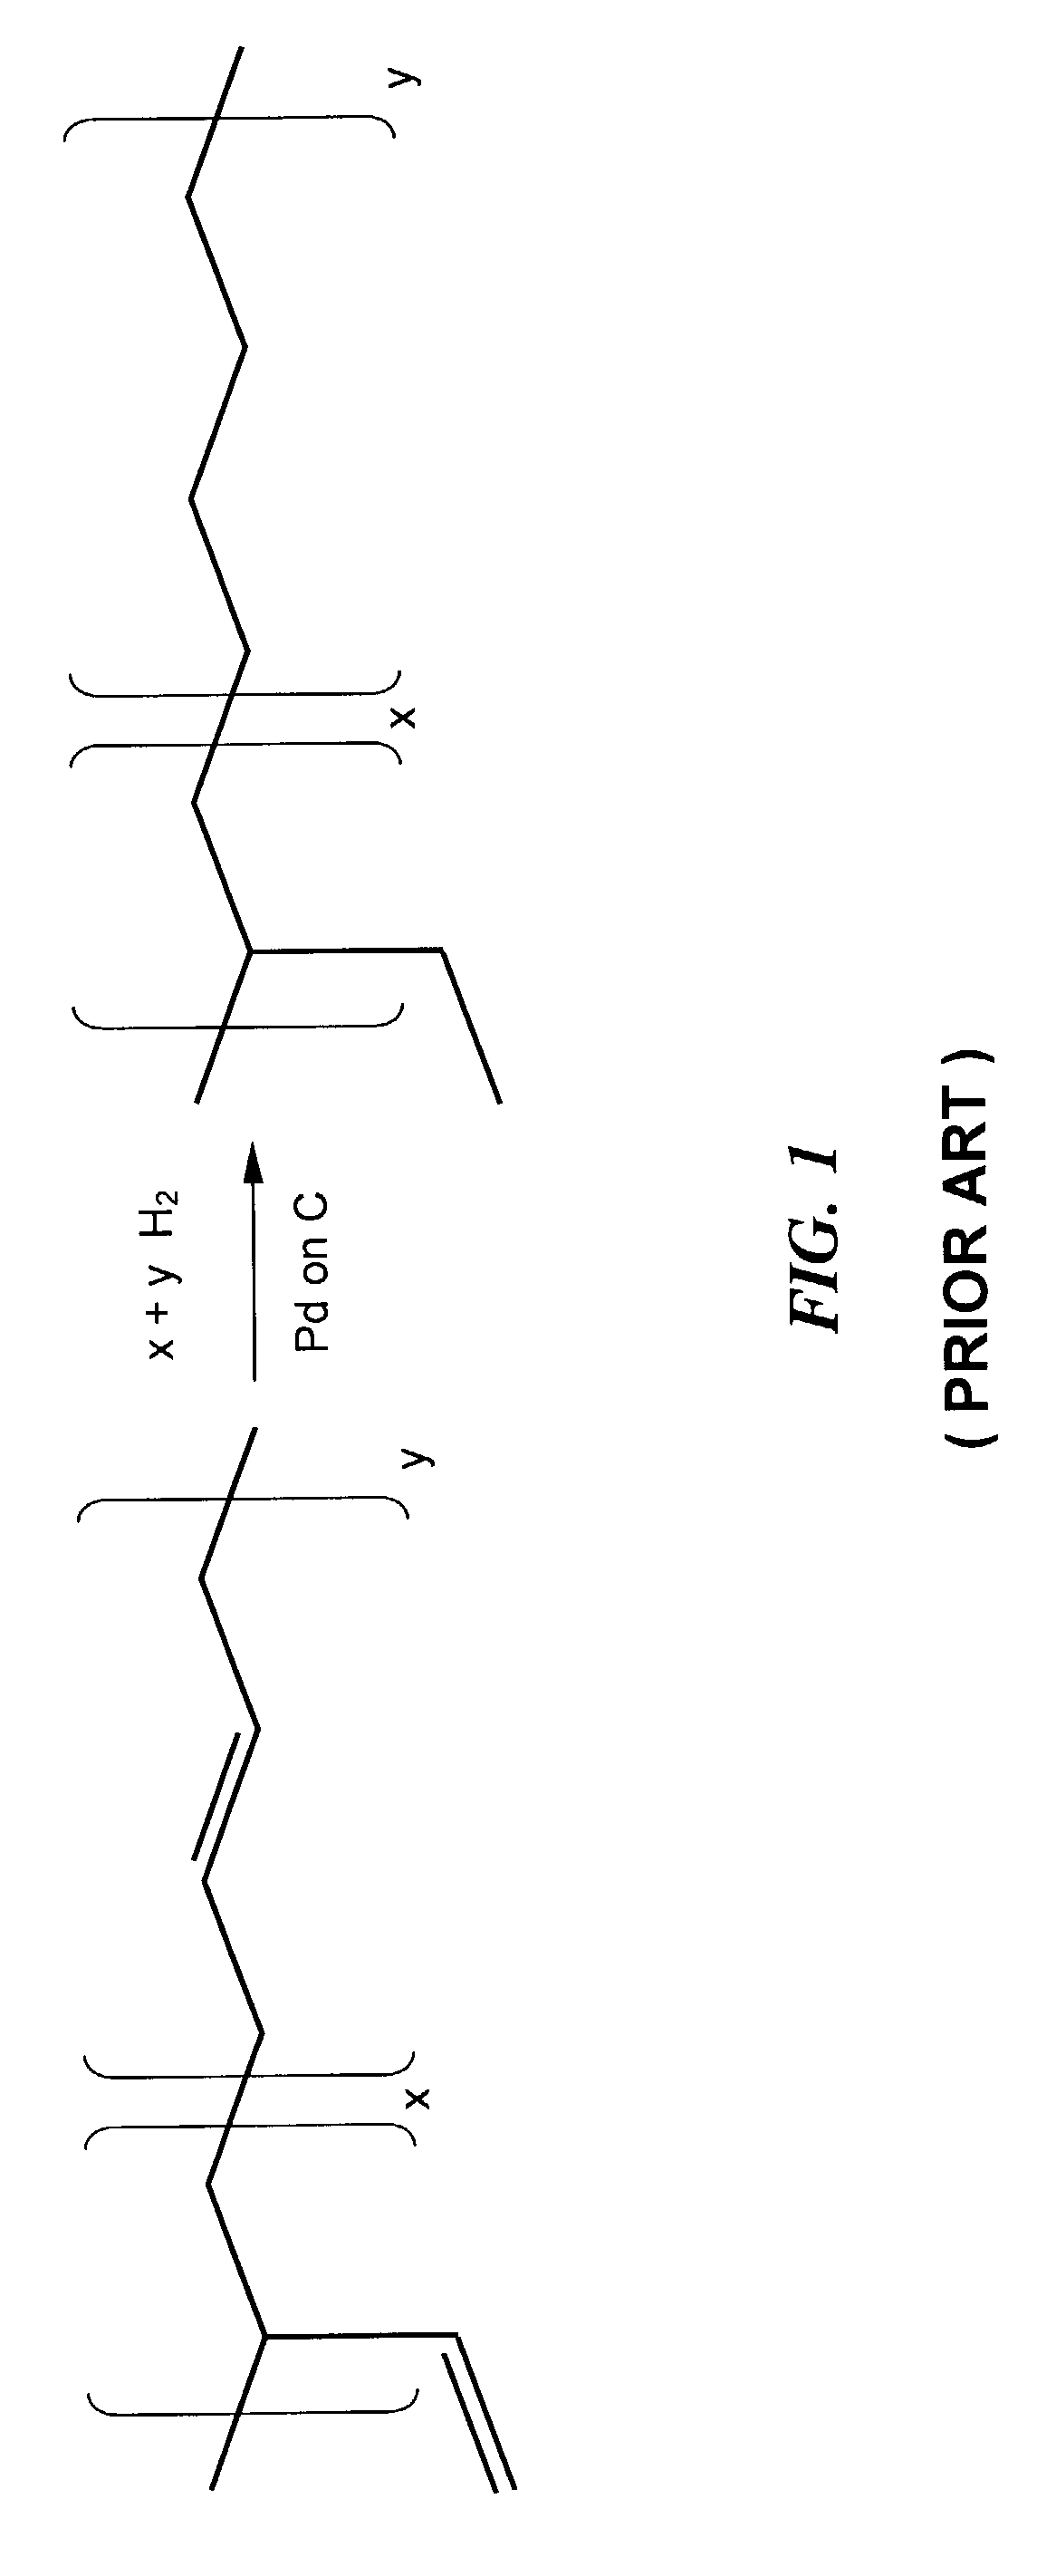 Polymer formulation for removing hydrogen and liquid water from an enclosed space